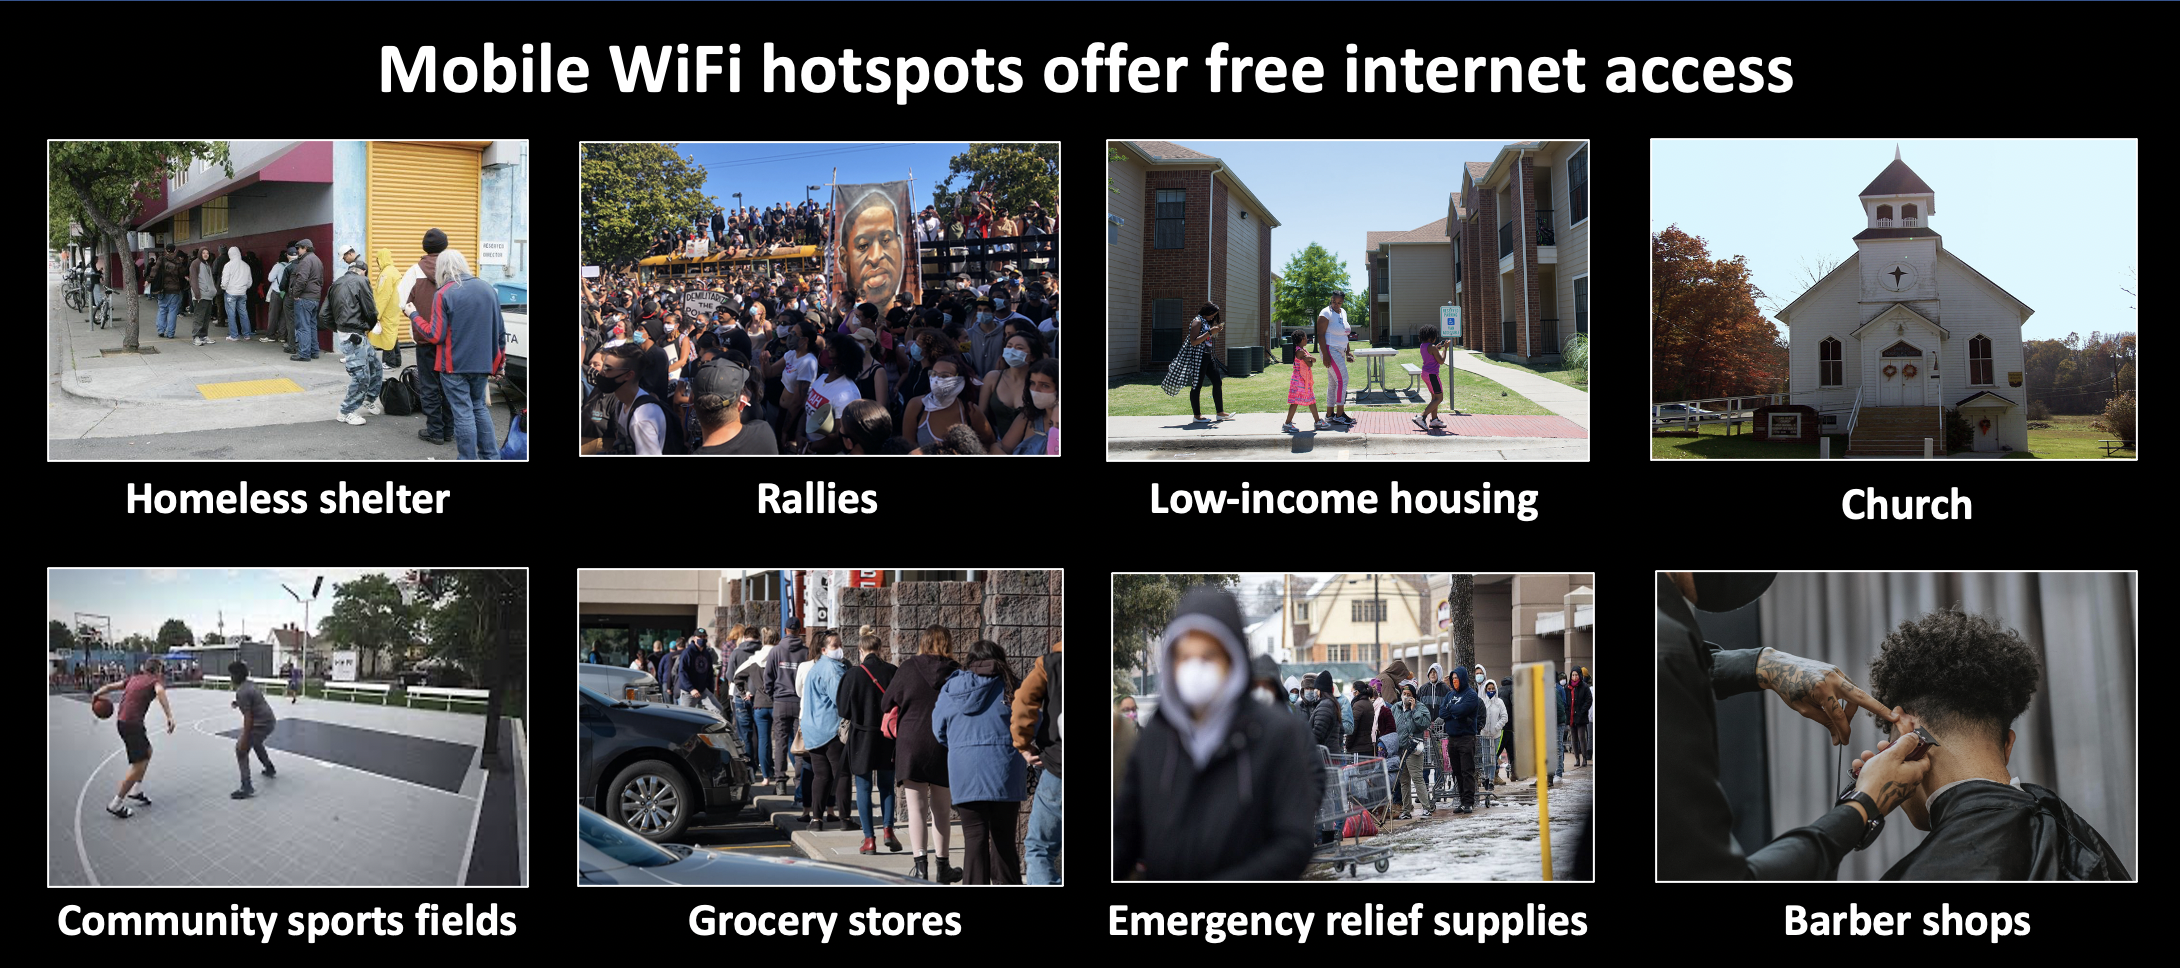 Mobile WiFi hotspots let organizers contact hard to reach communities.